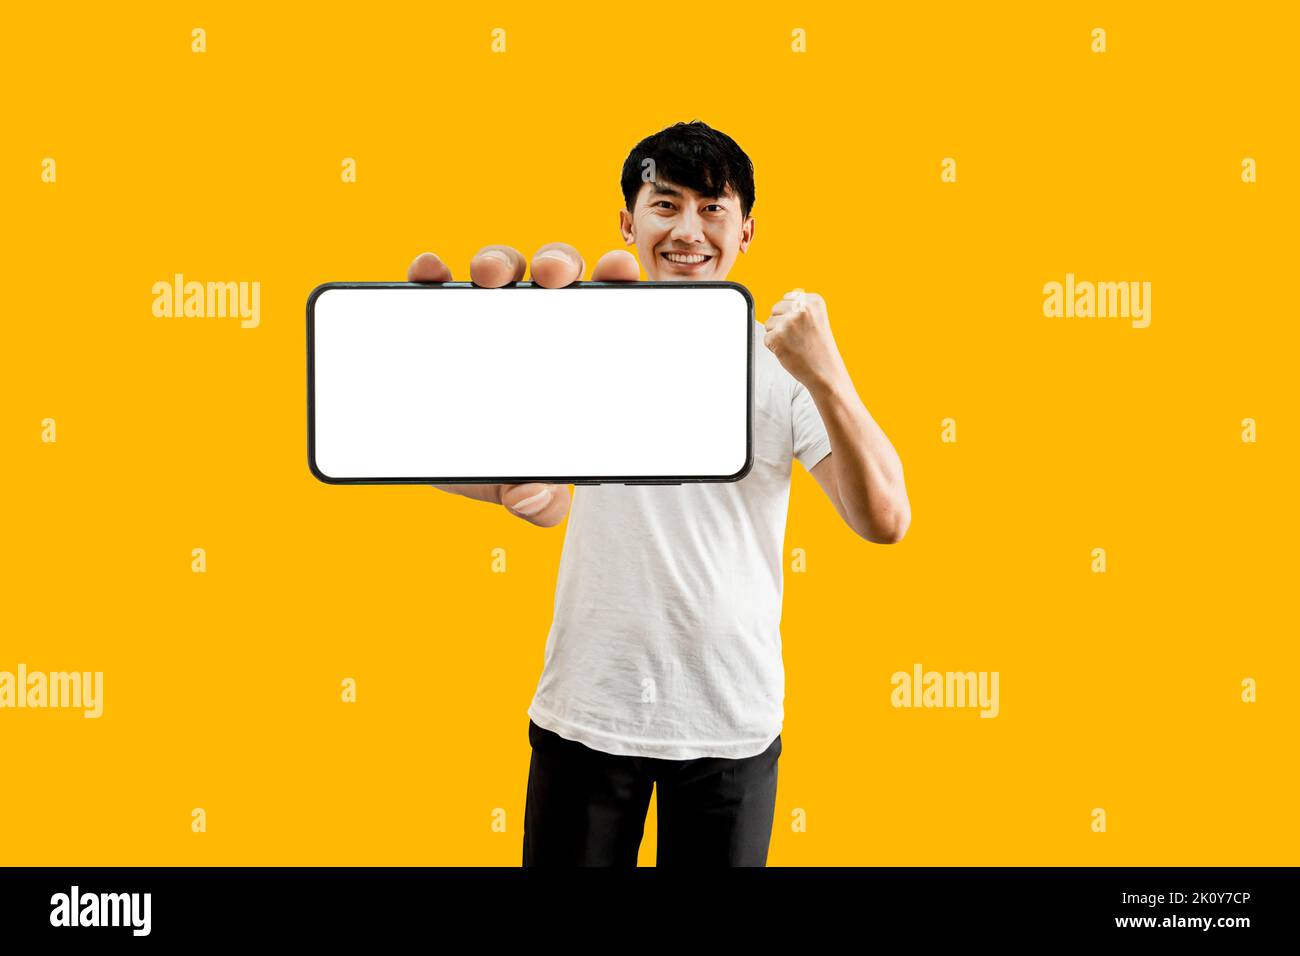 Asian Man Holding Smartphone With Empty White Screen On Yellow Background. Cellphone display Mockup for Mobile App Advertisement. Stock Photo